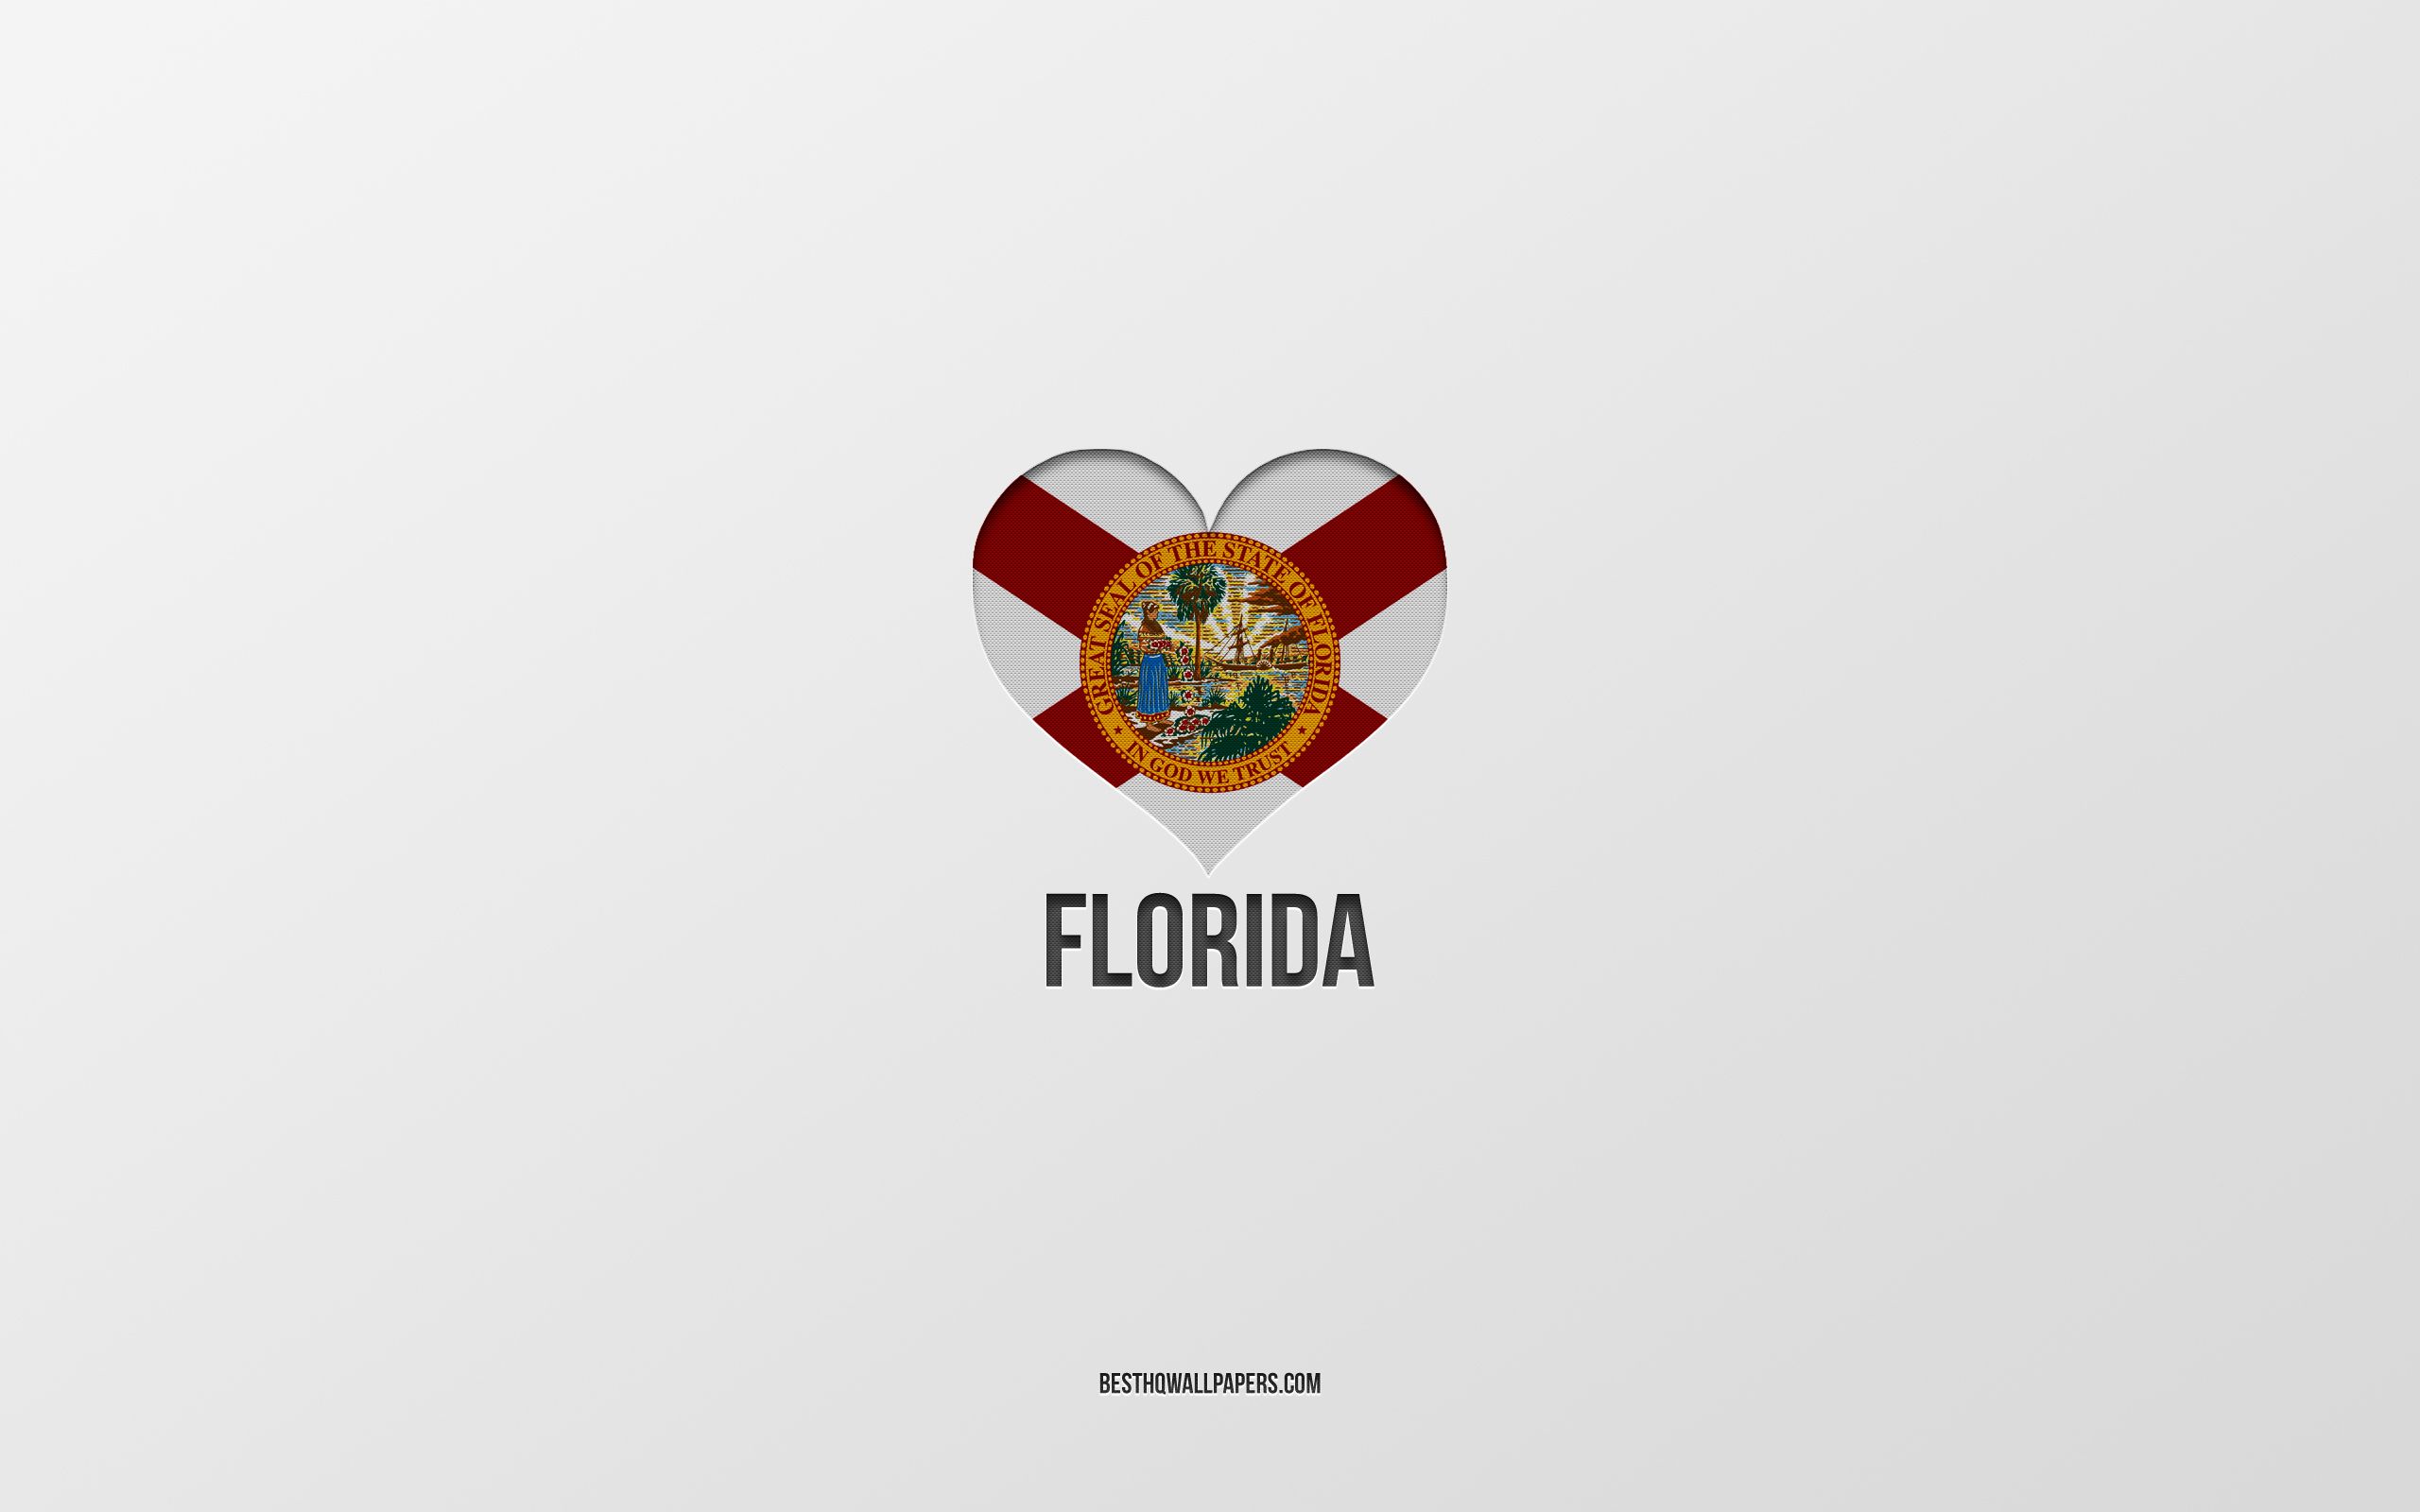 Download wallpaper I Love Florida, American States, gray background, Florida State, USA, Florida flag heart, favorite cities, Love Florida for desktop with resolution 2560x1600. High Quality HD picture wallpaper